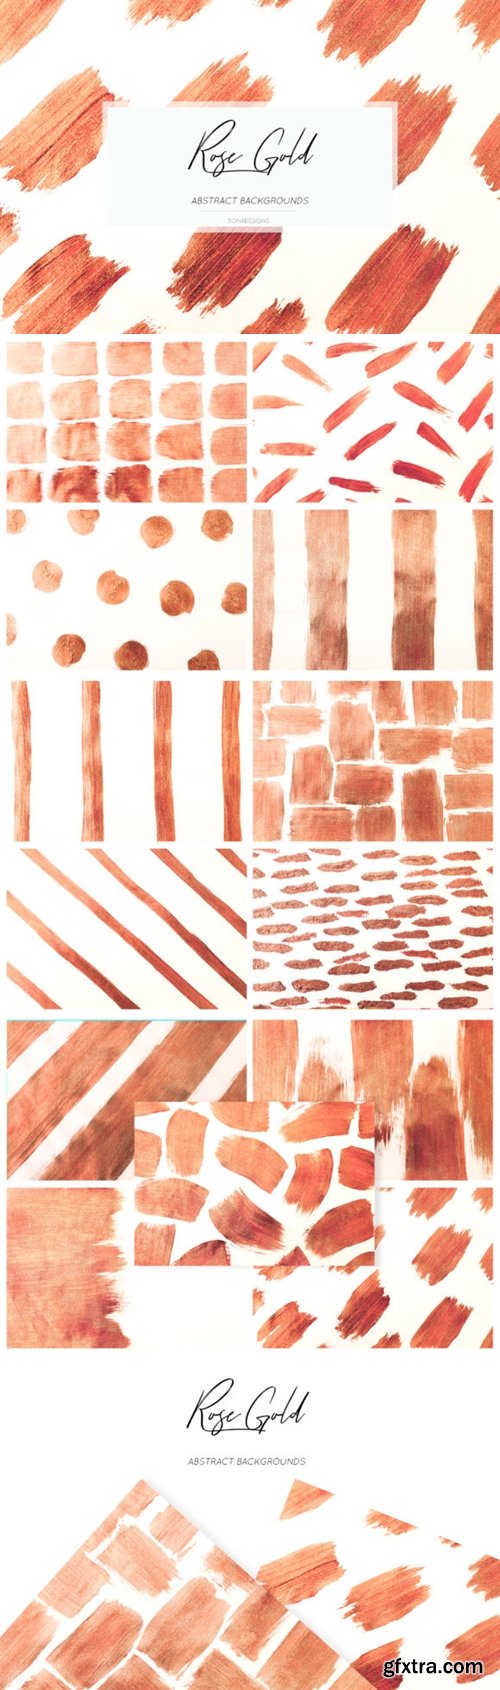 Rose Gold Abstract Backgrounds 1646502